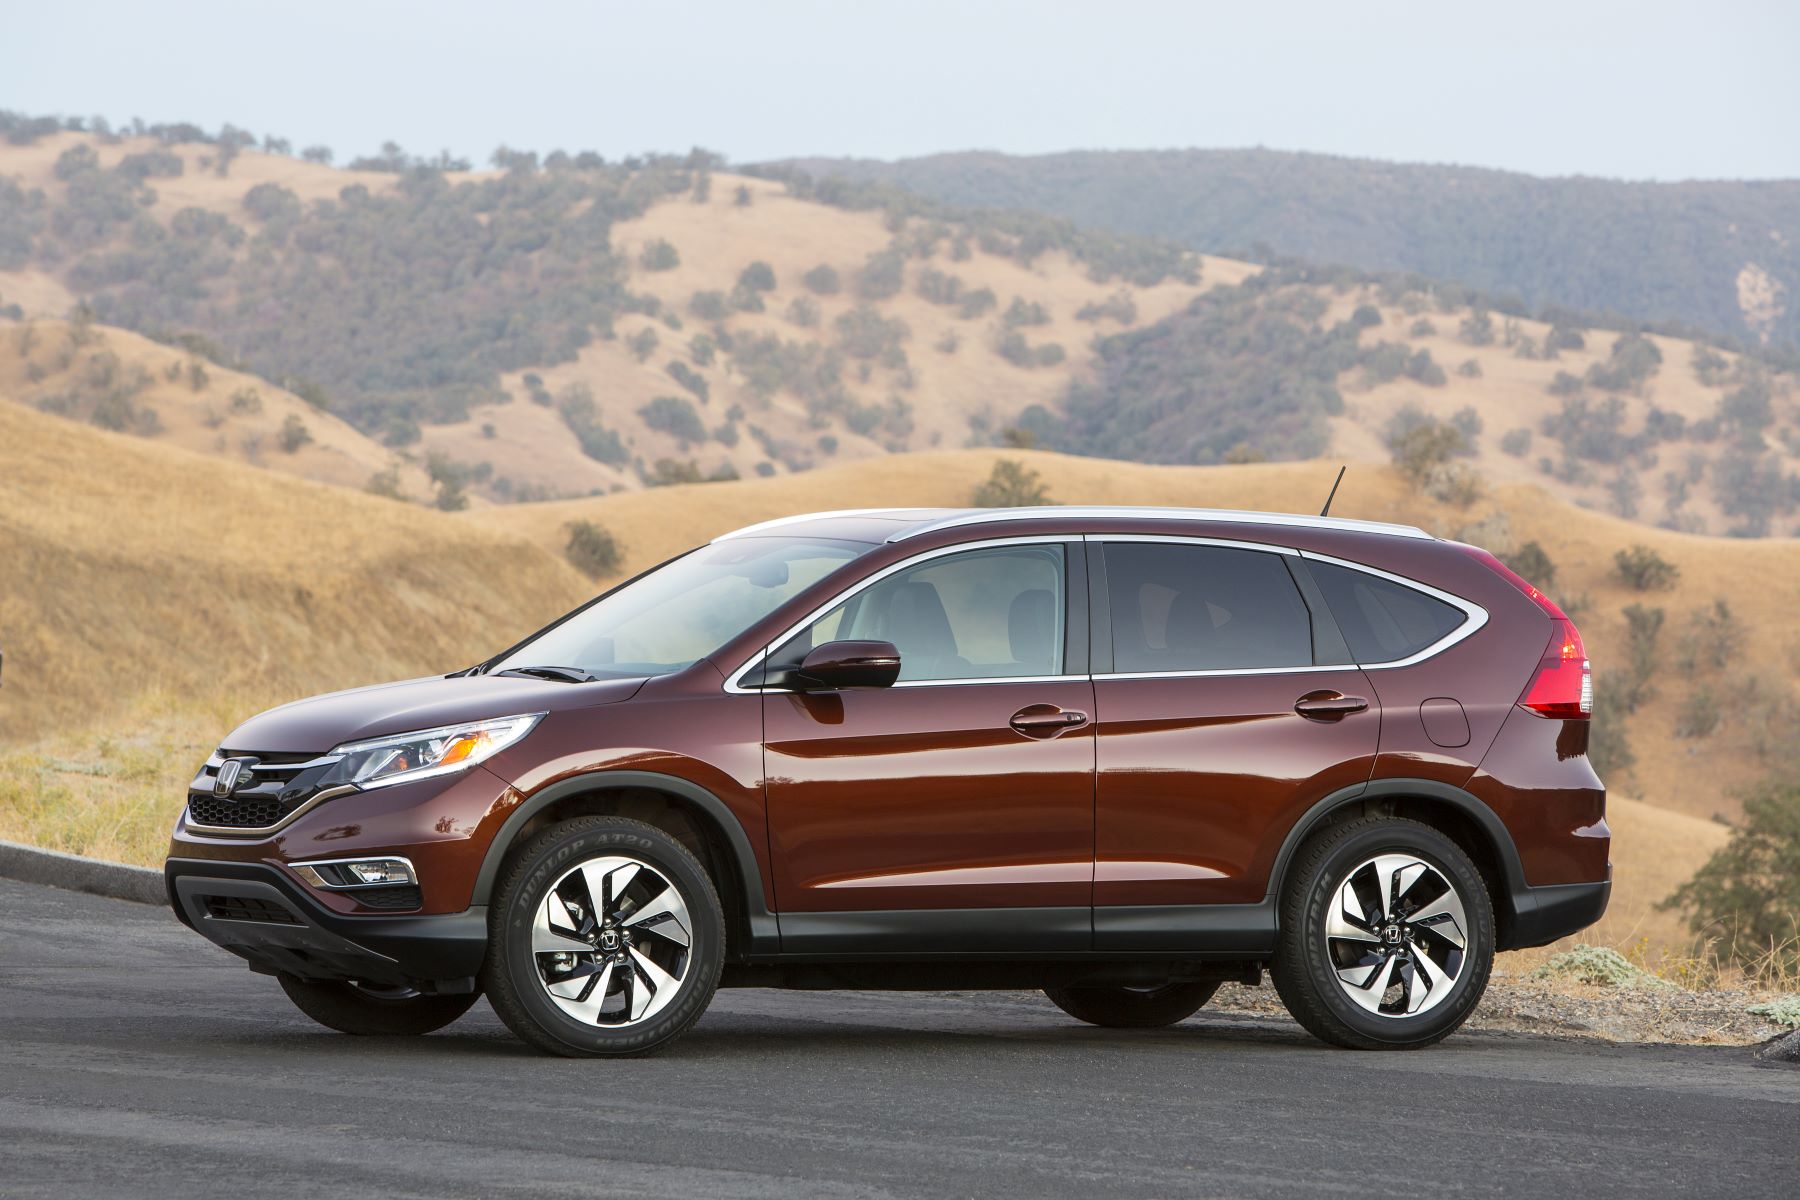 The 2015 Honda CR-V compact SUV model with a dark reed paint color option parked on an asphalt road near hills of yellow grass